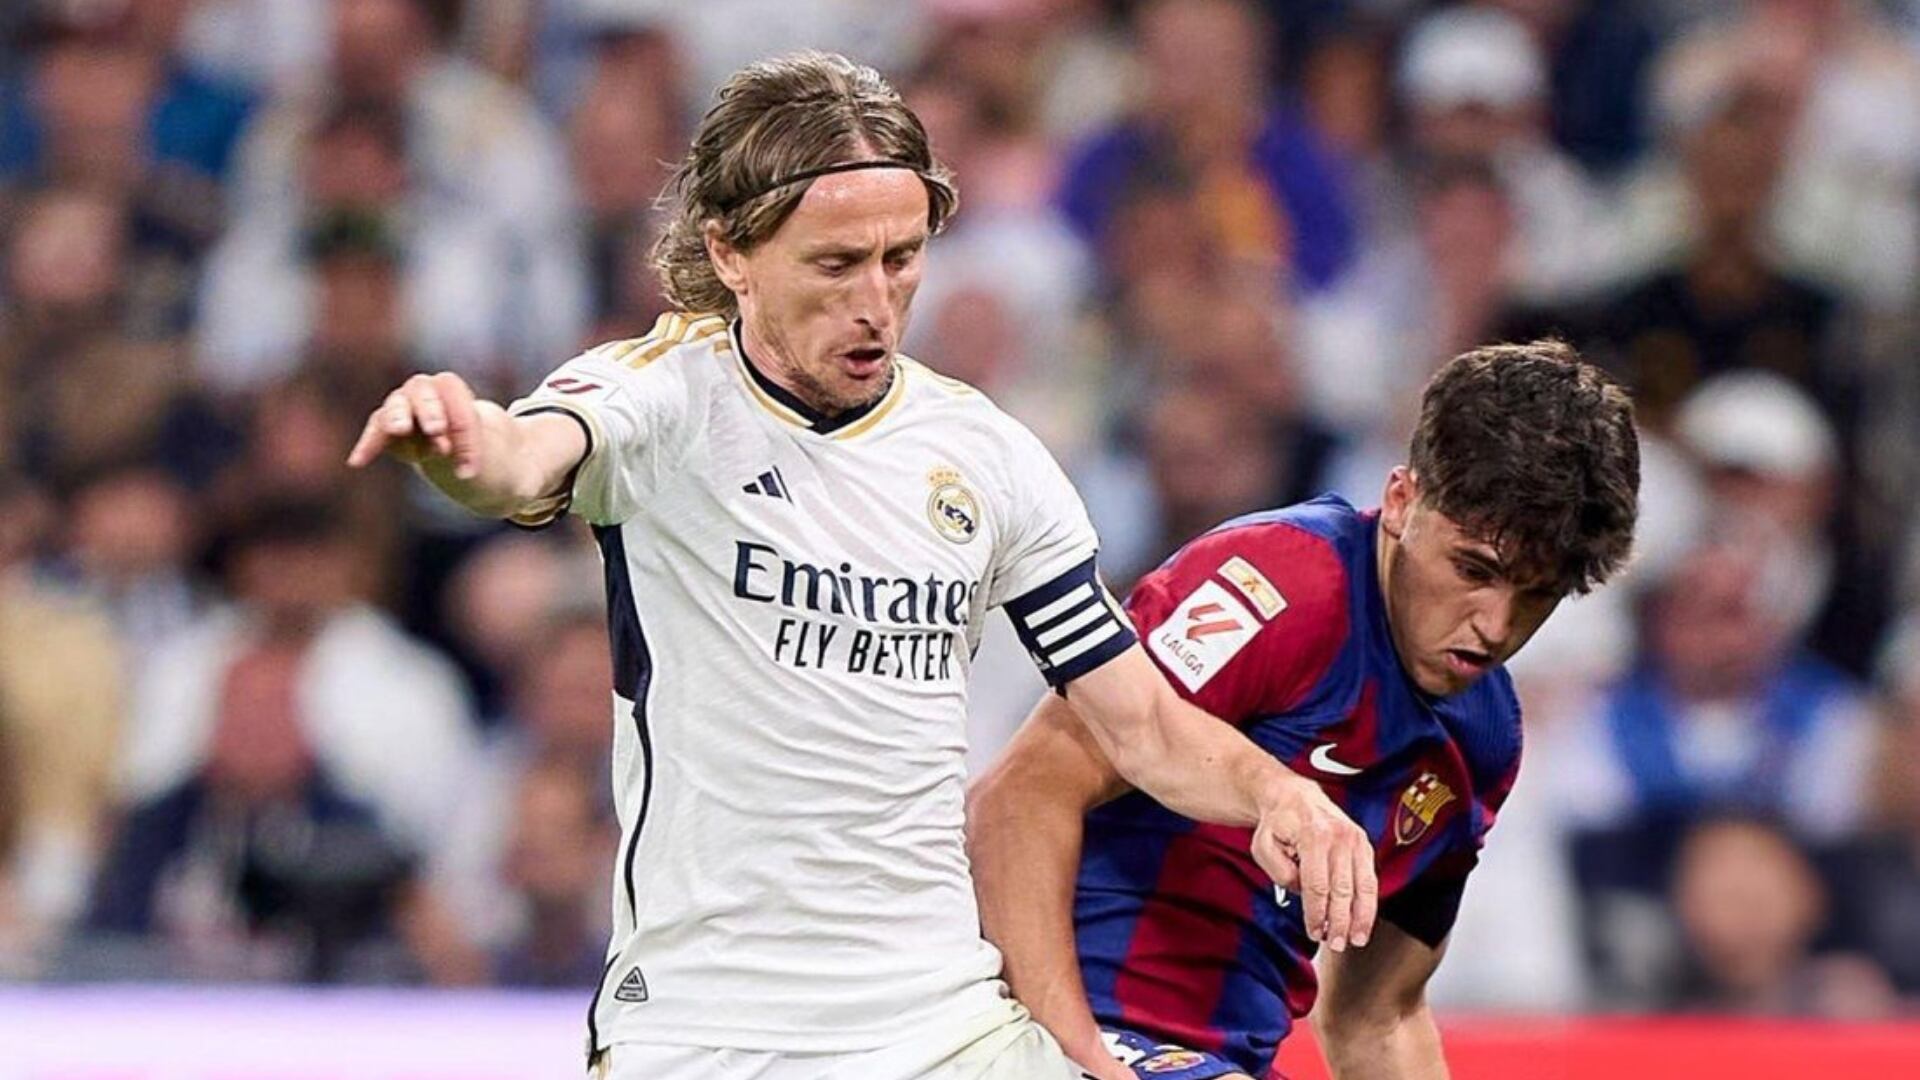 Modric probably played his last El Clasico for Real Madrid and this was his message to the fans